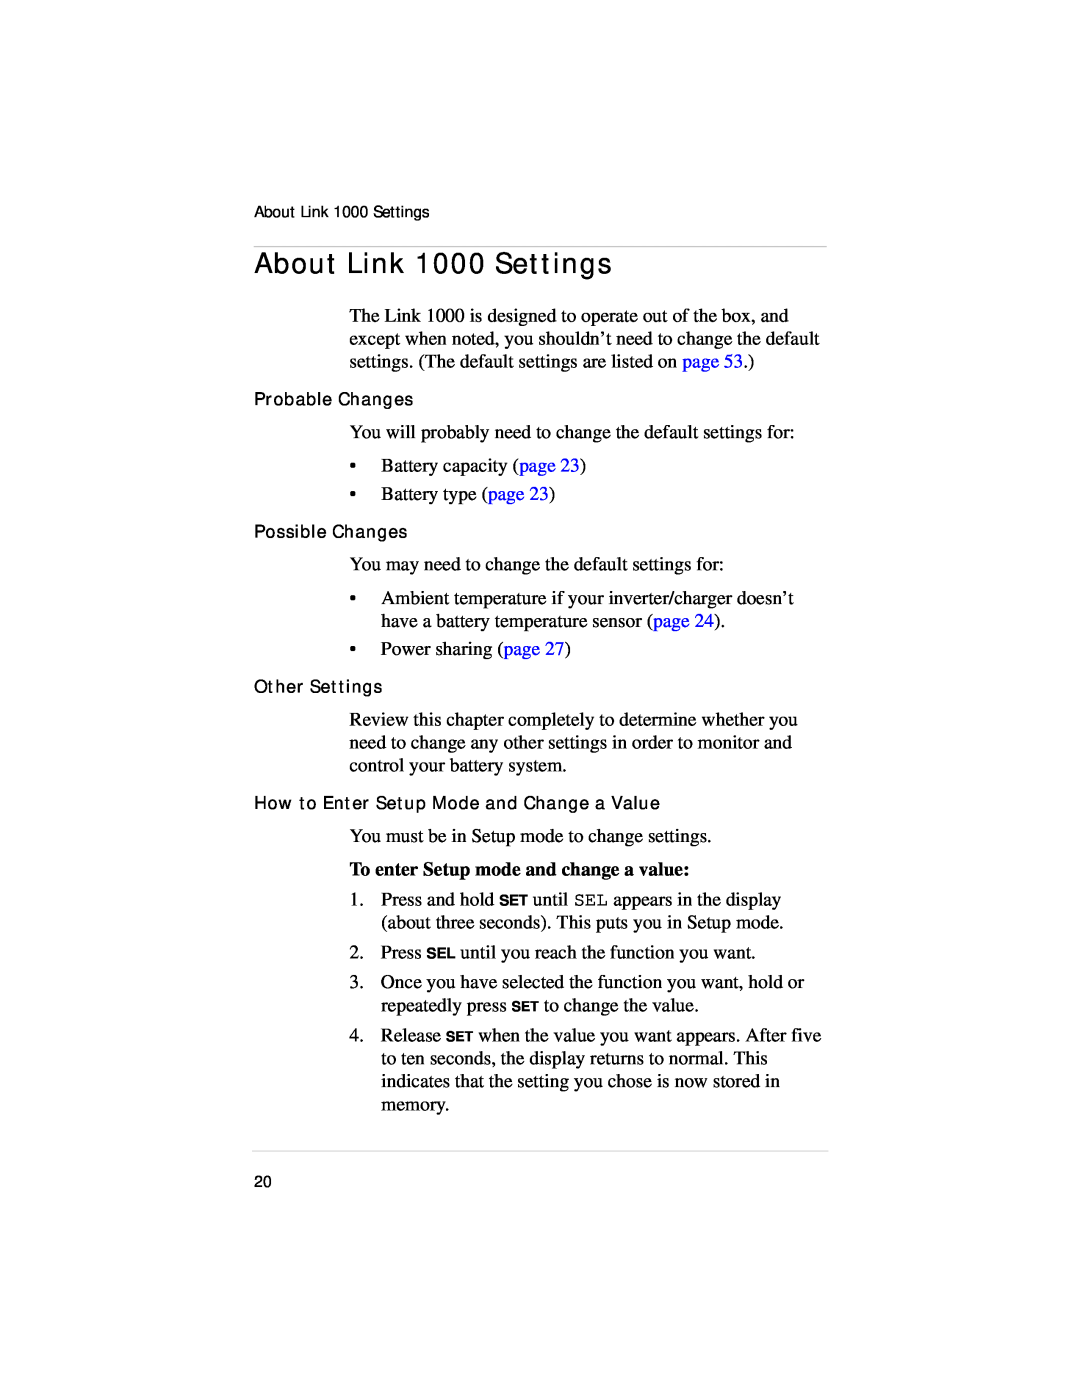 Xantrex Technology manual About Link 1000 Settings, To enter Setup mode and change a value 